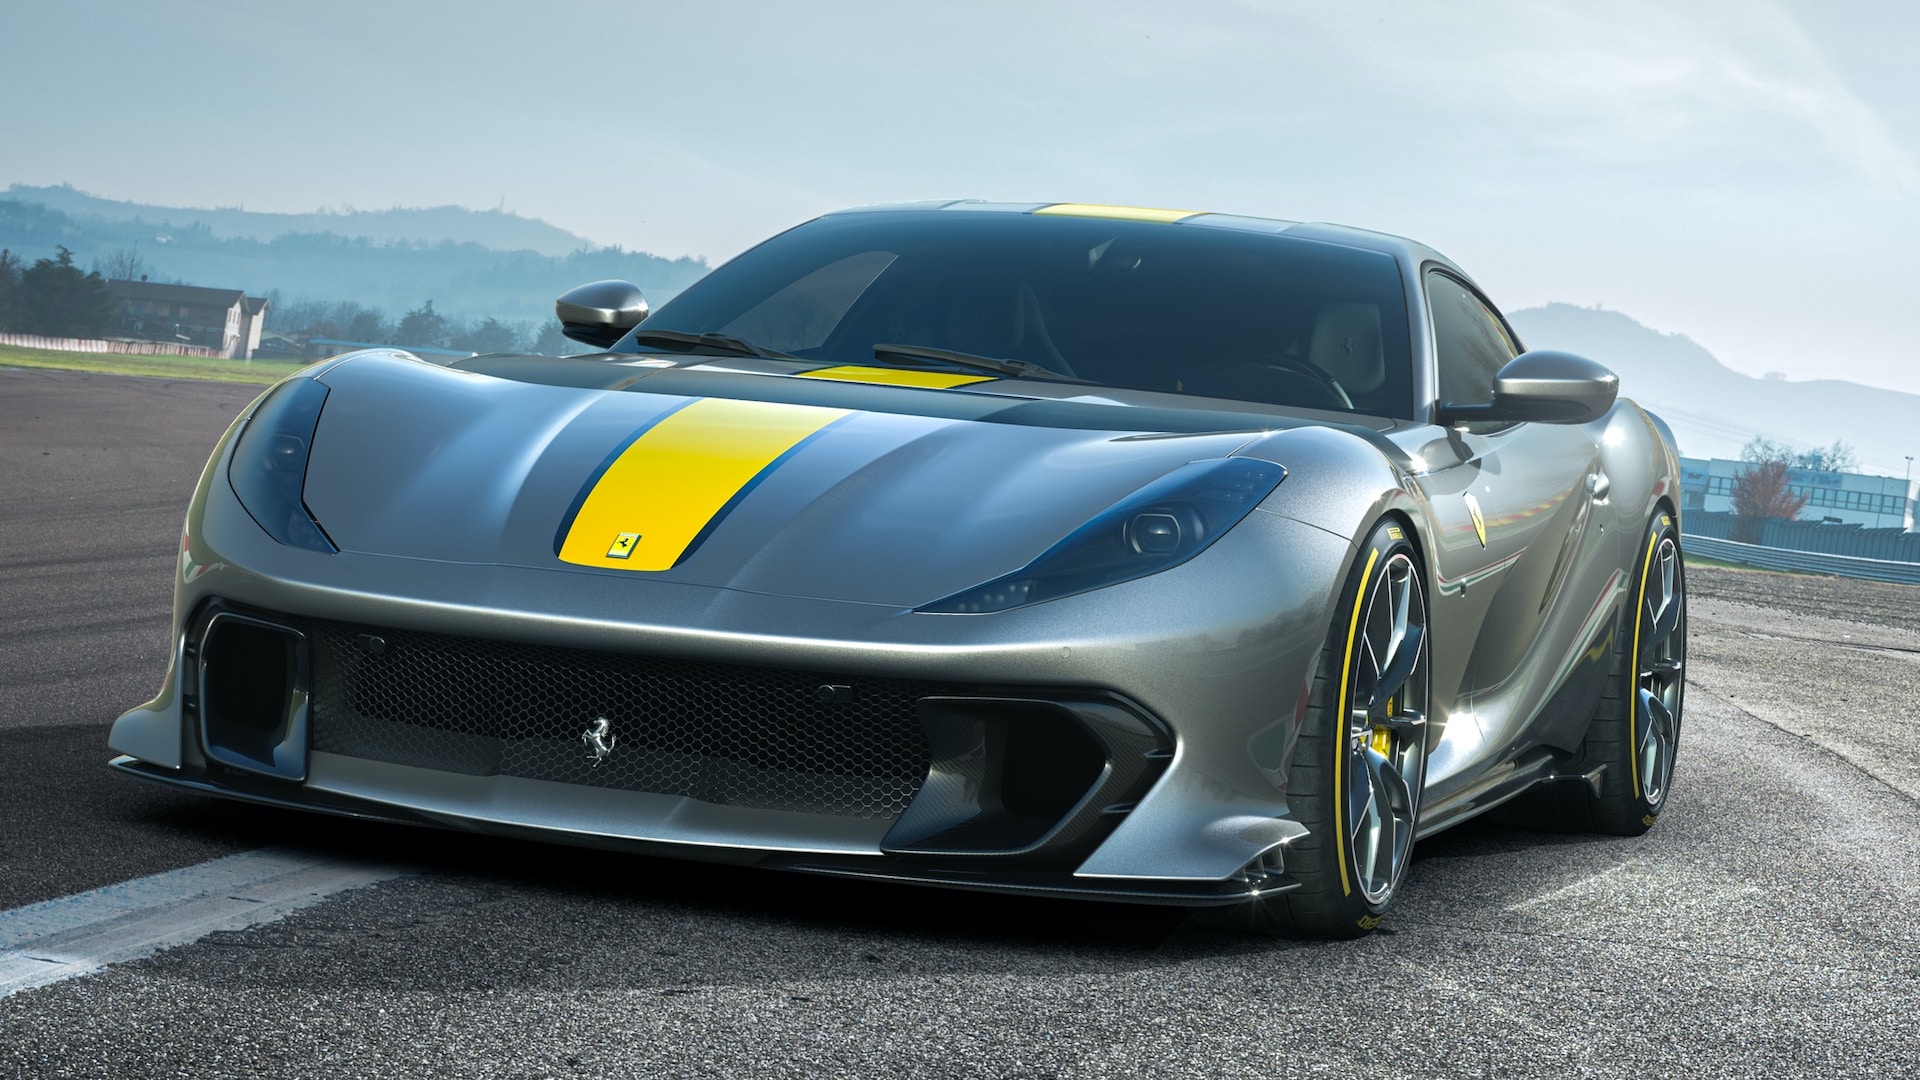 2022 Ferrari 812 Superfast Prices, Reviews, and Photos - MotorTrend